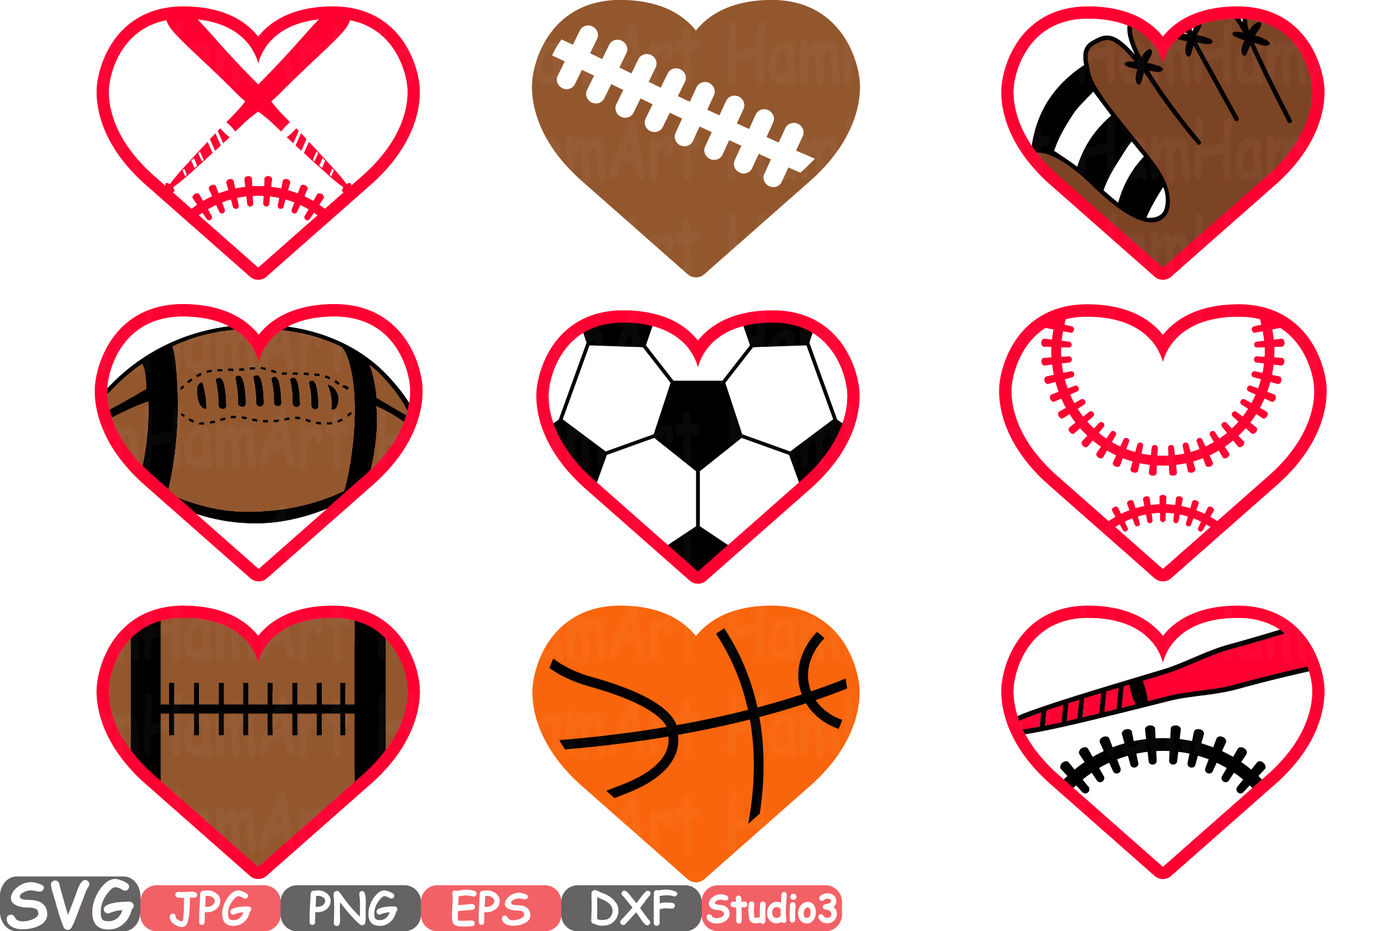 The heart background stencil set free svg files also makes a great vector d...